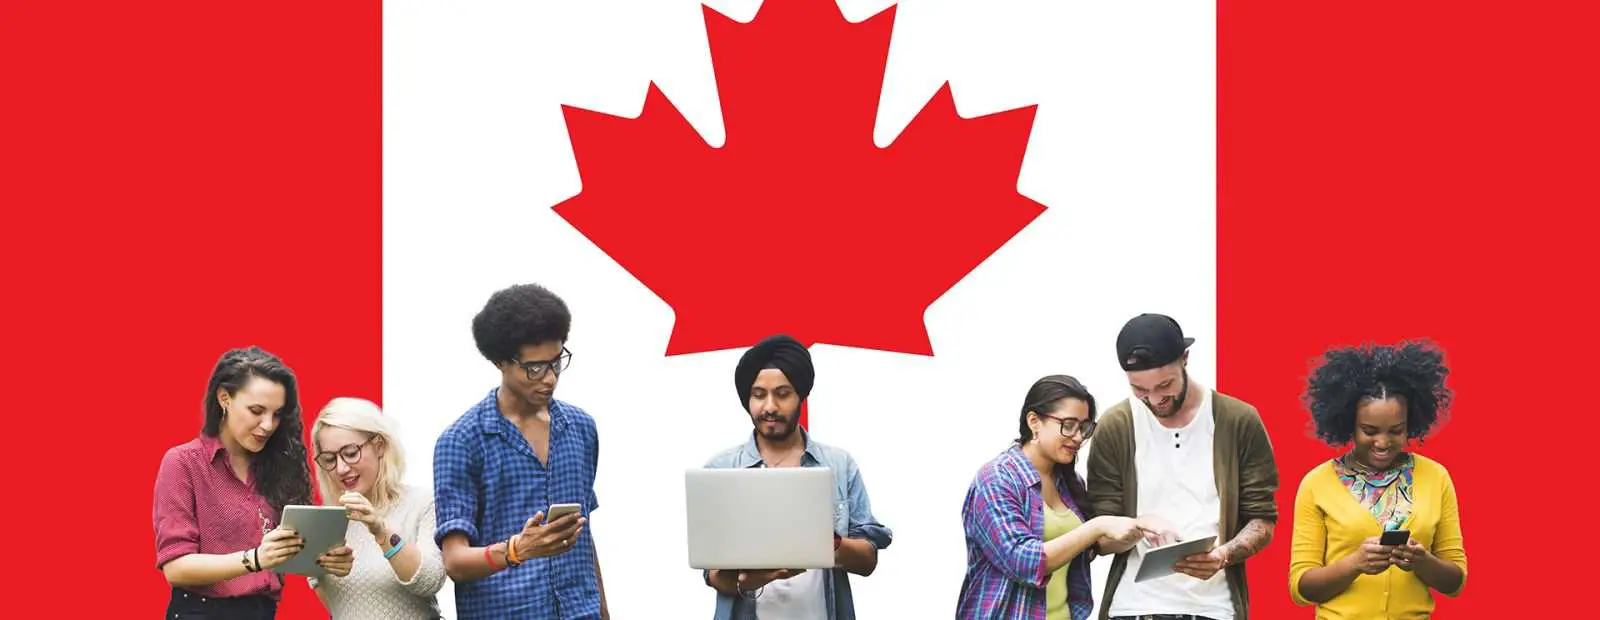 Tips to migrate Canada on Student Visa